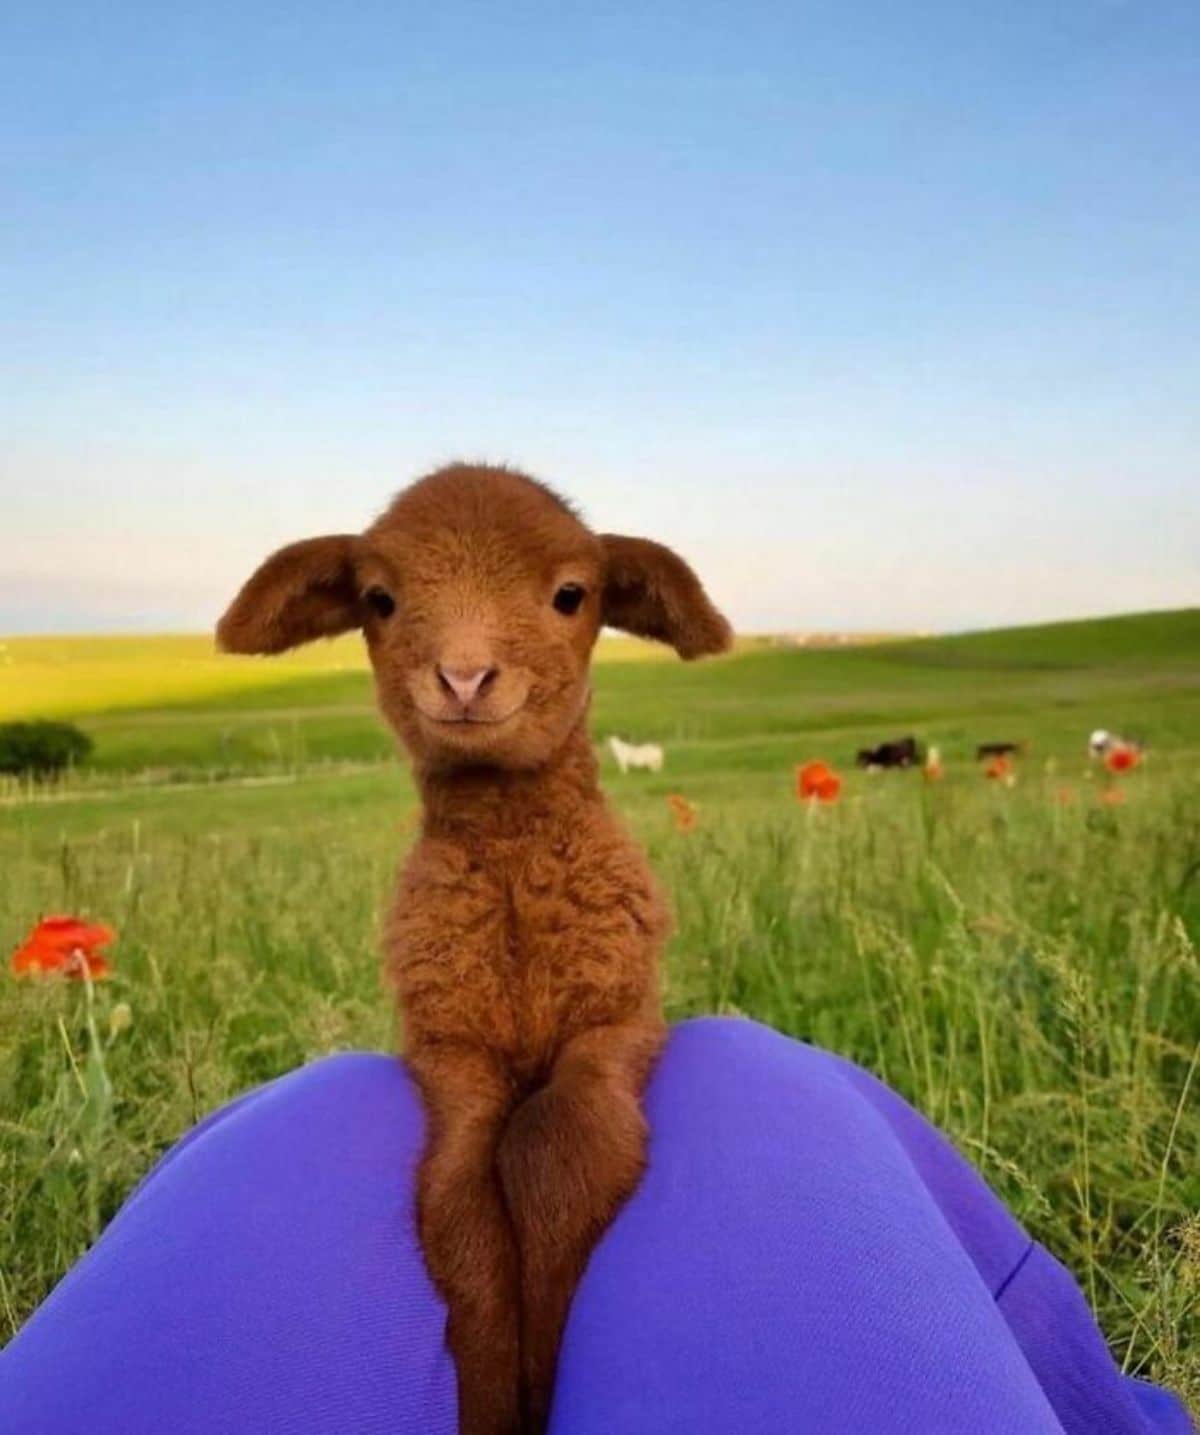 brown lamb with front legs placed on someone's lap